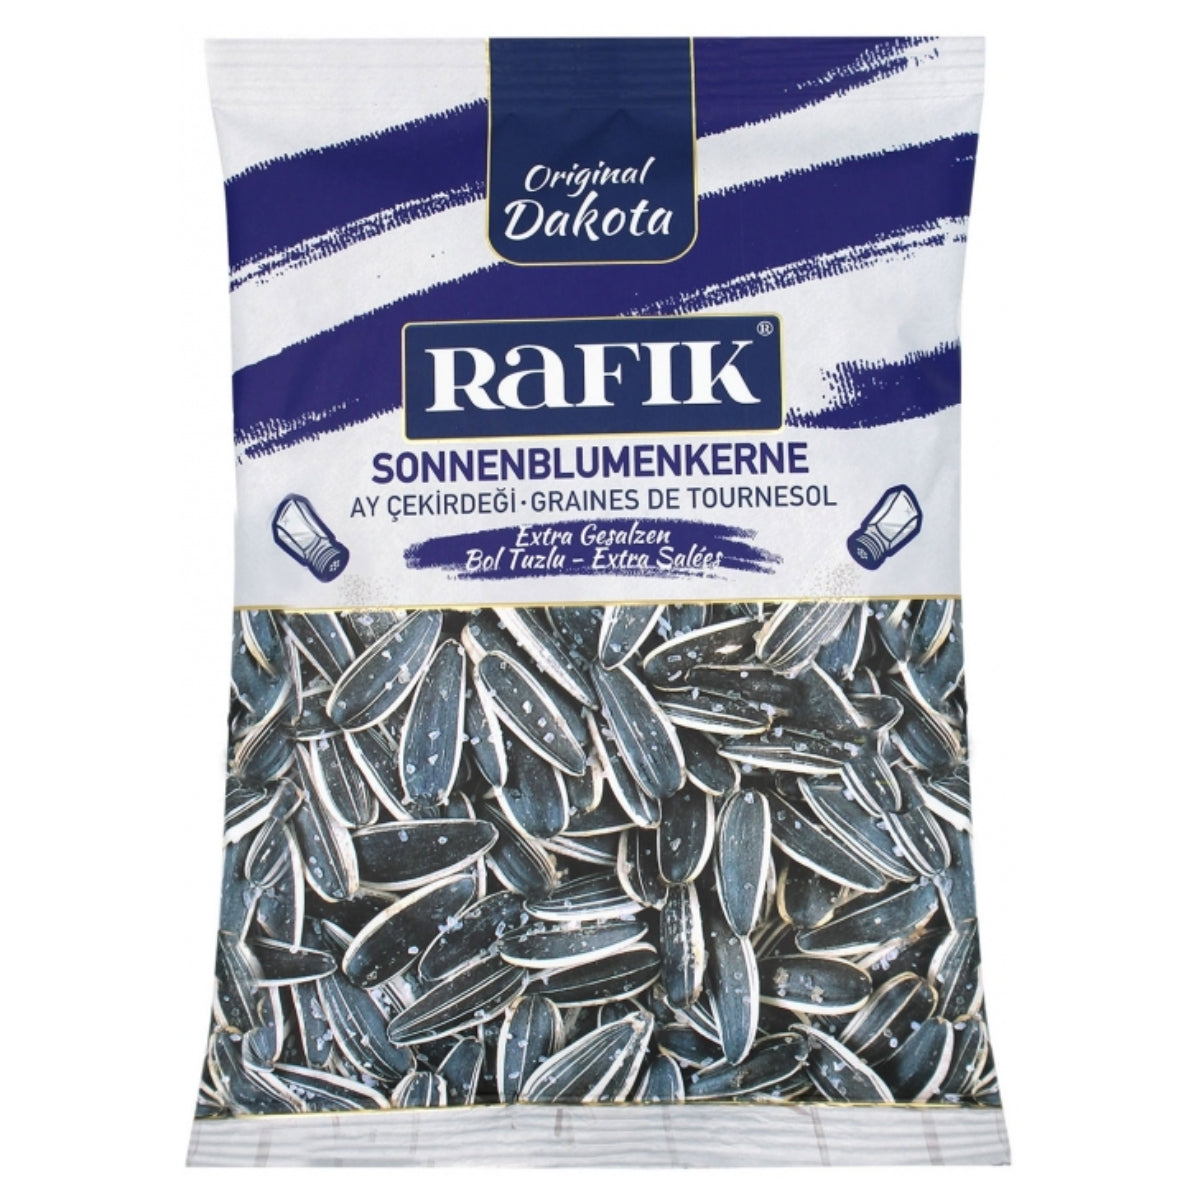 A bag of Rafik - Extra Salted Sunflower Seeds Original Dakota - 150g with branding in multiple languages on the packaging, including "Original Dakota" and "Sonnenblumenkerne." The seeds are visible through a transparent section.